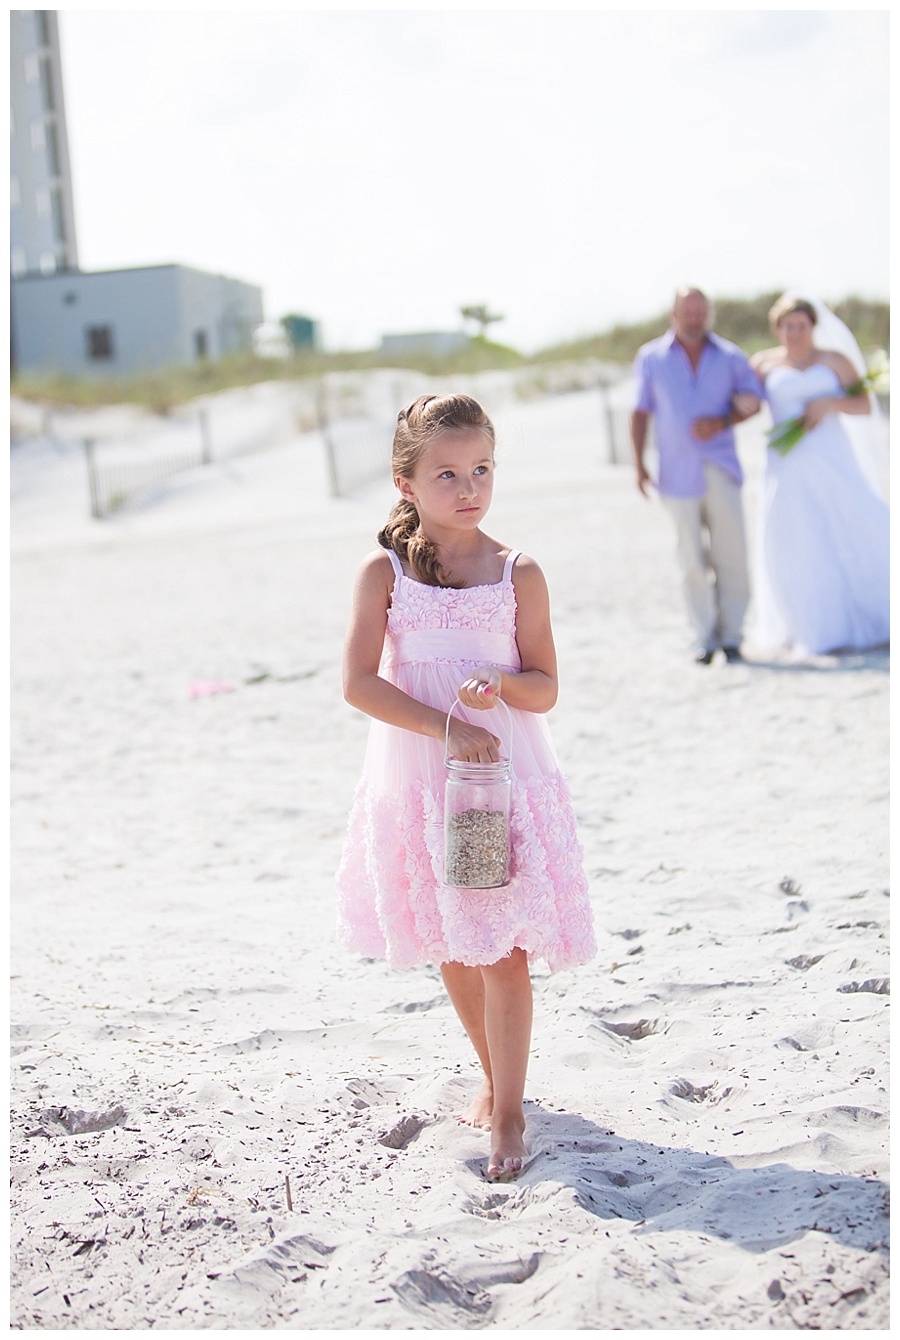 Wilmington, NC Wedding Photography by Five Copper Creative